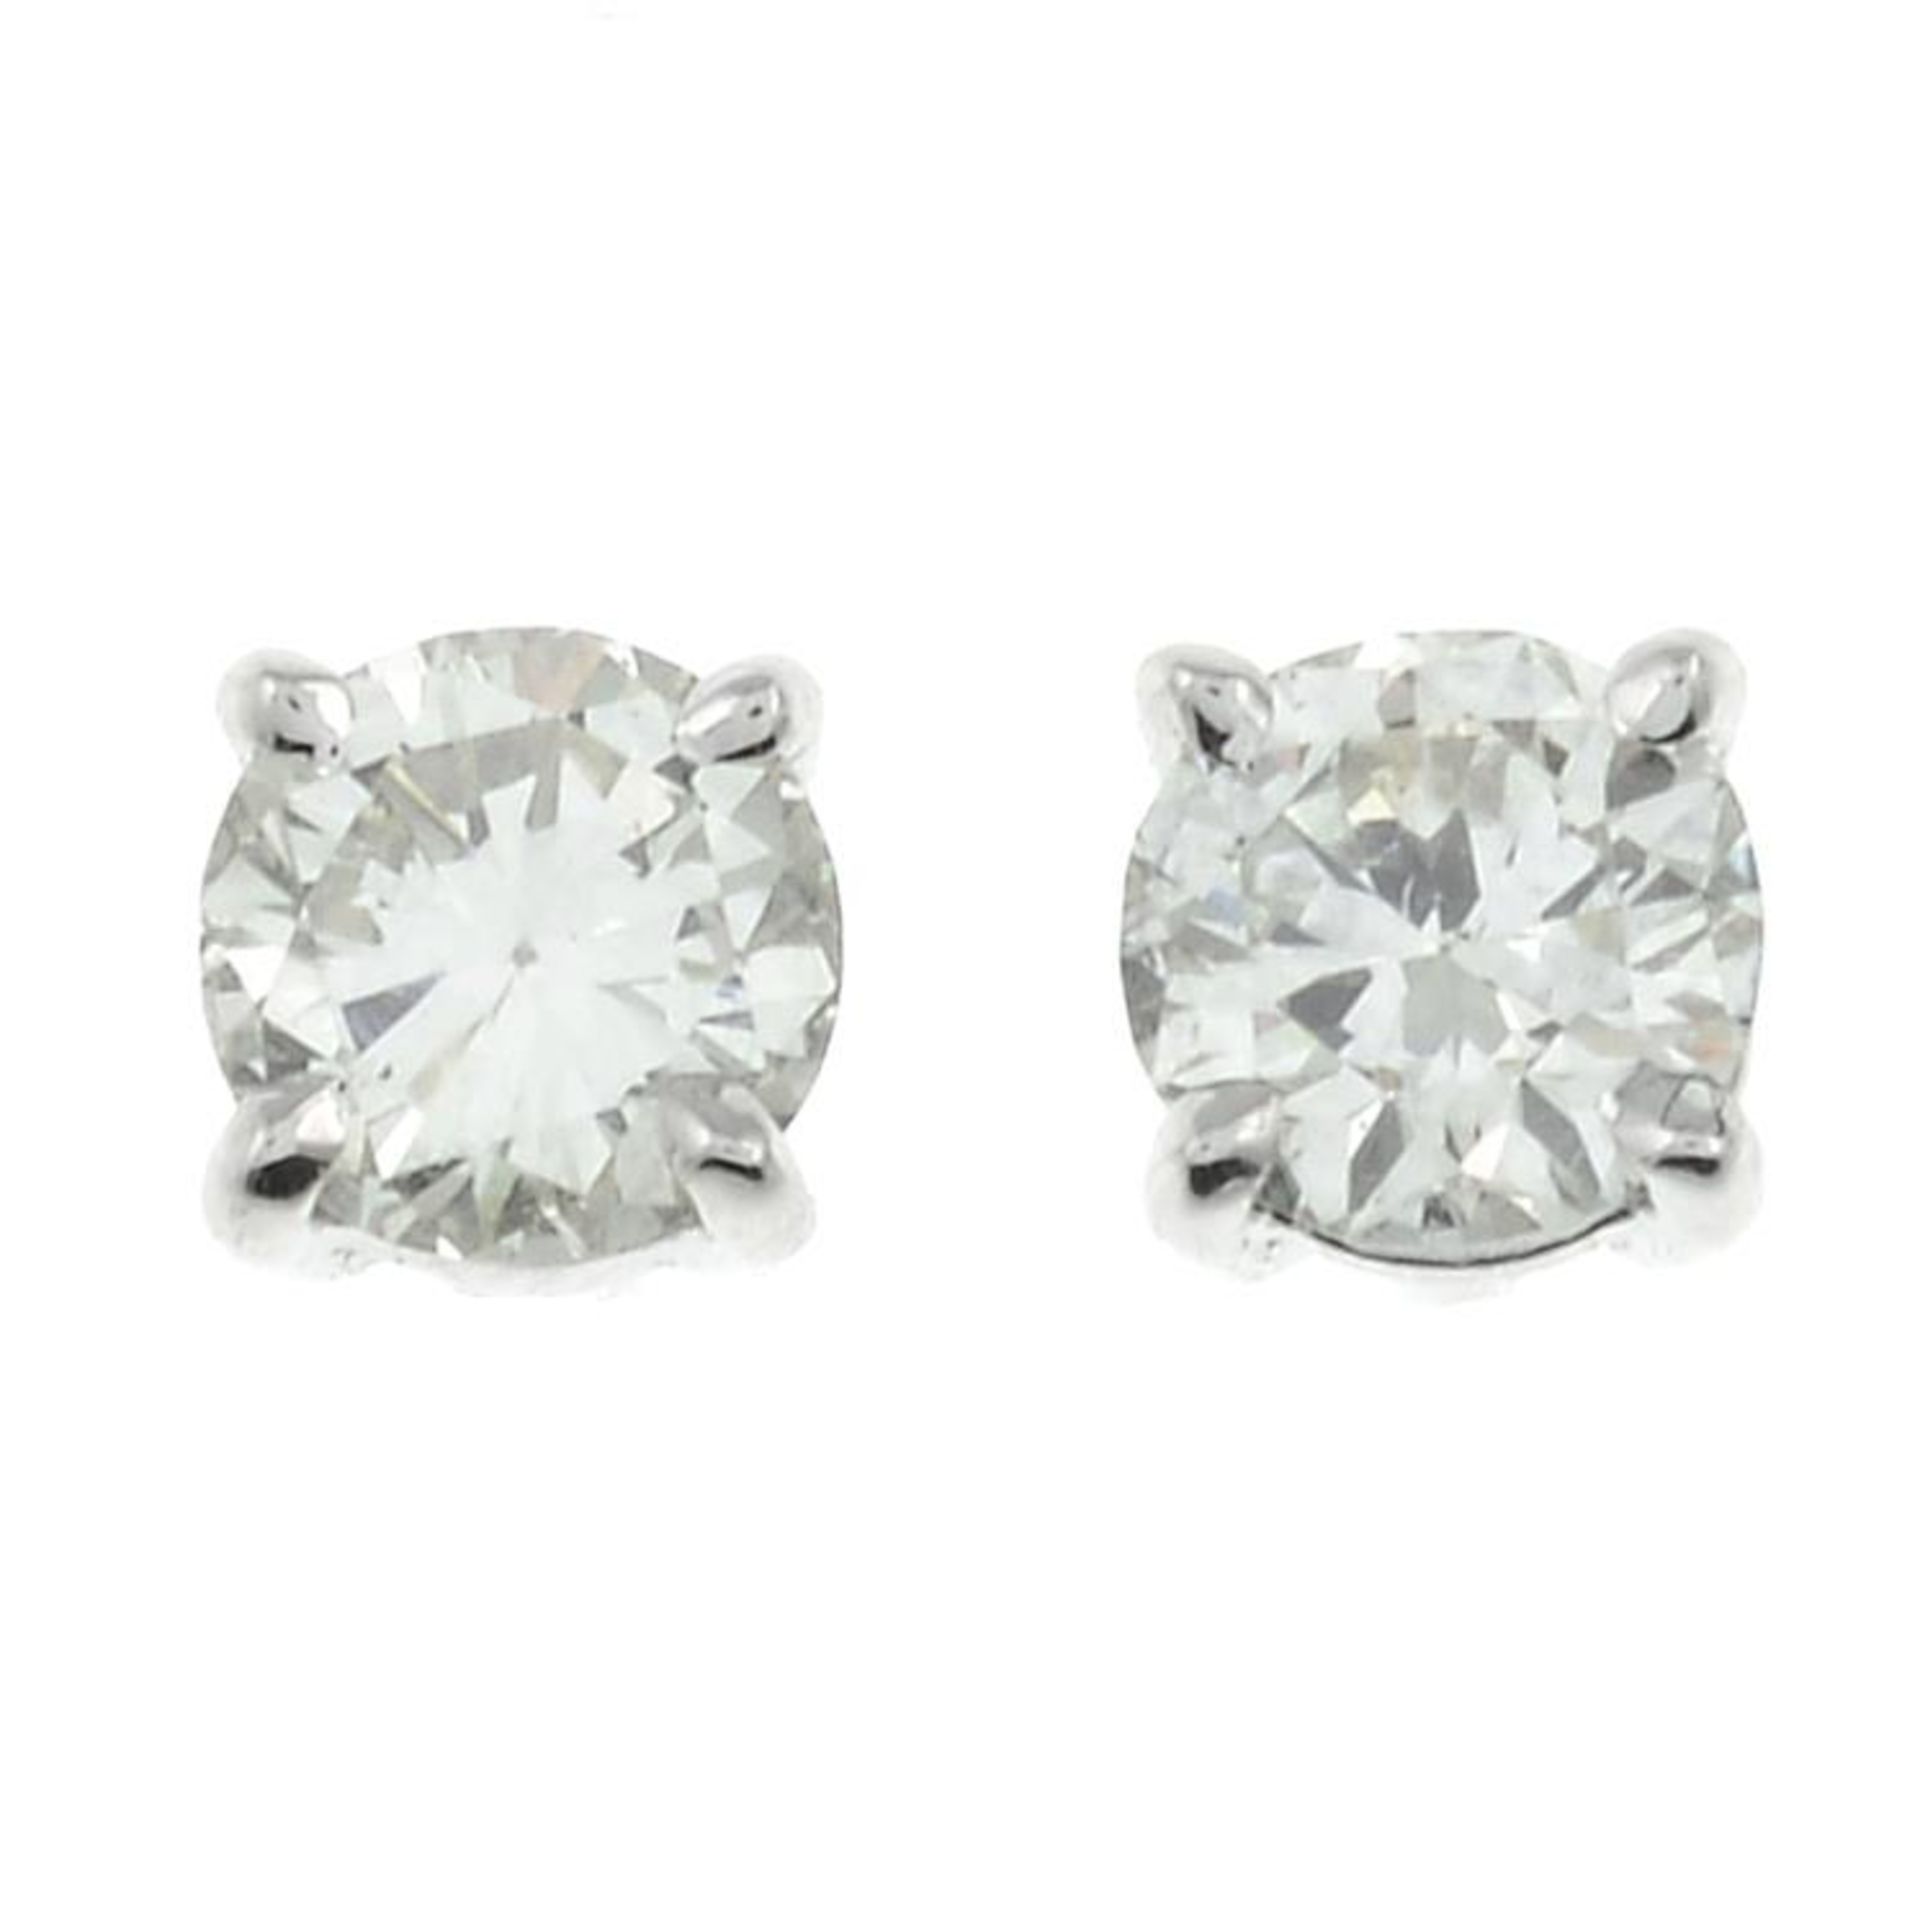 A pair of 18ct gold diamond stud earrings.Estimated total diamond weight 0.50ct,